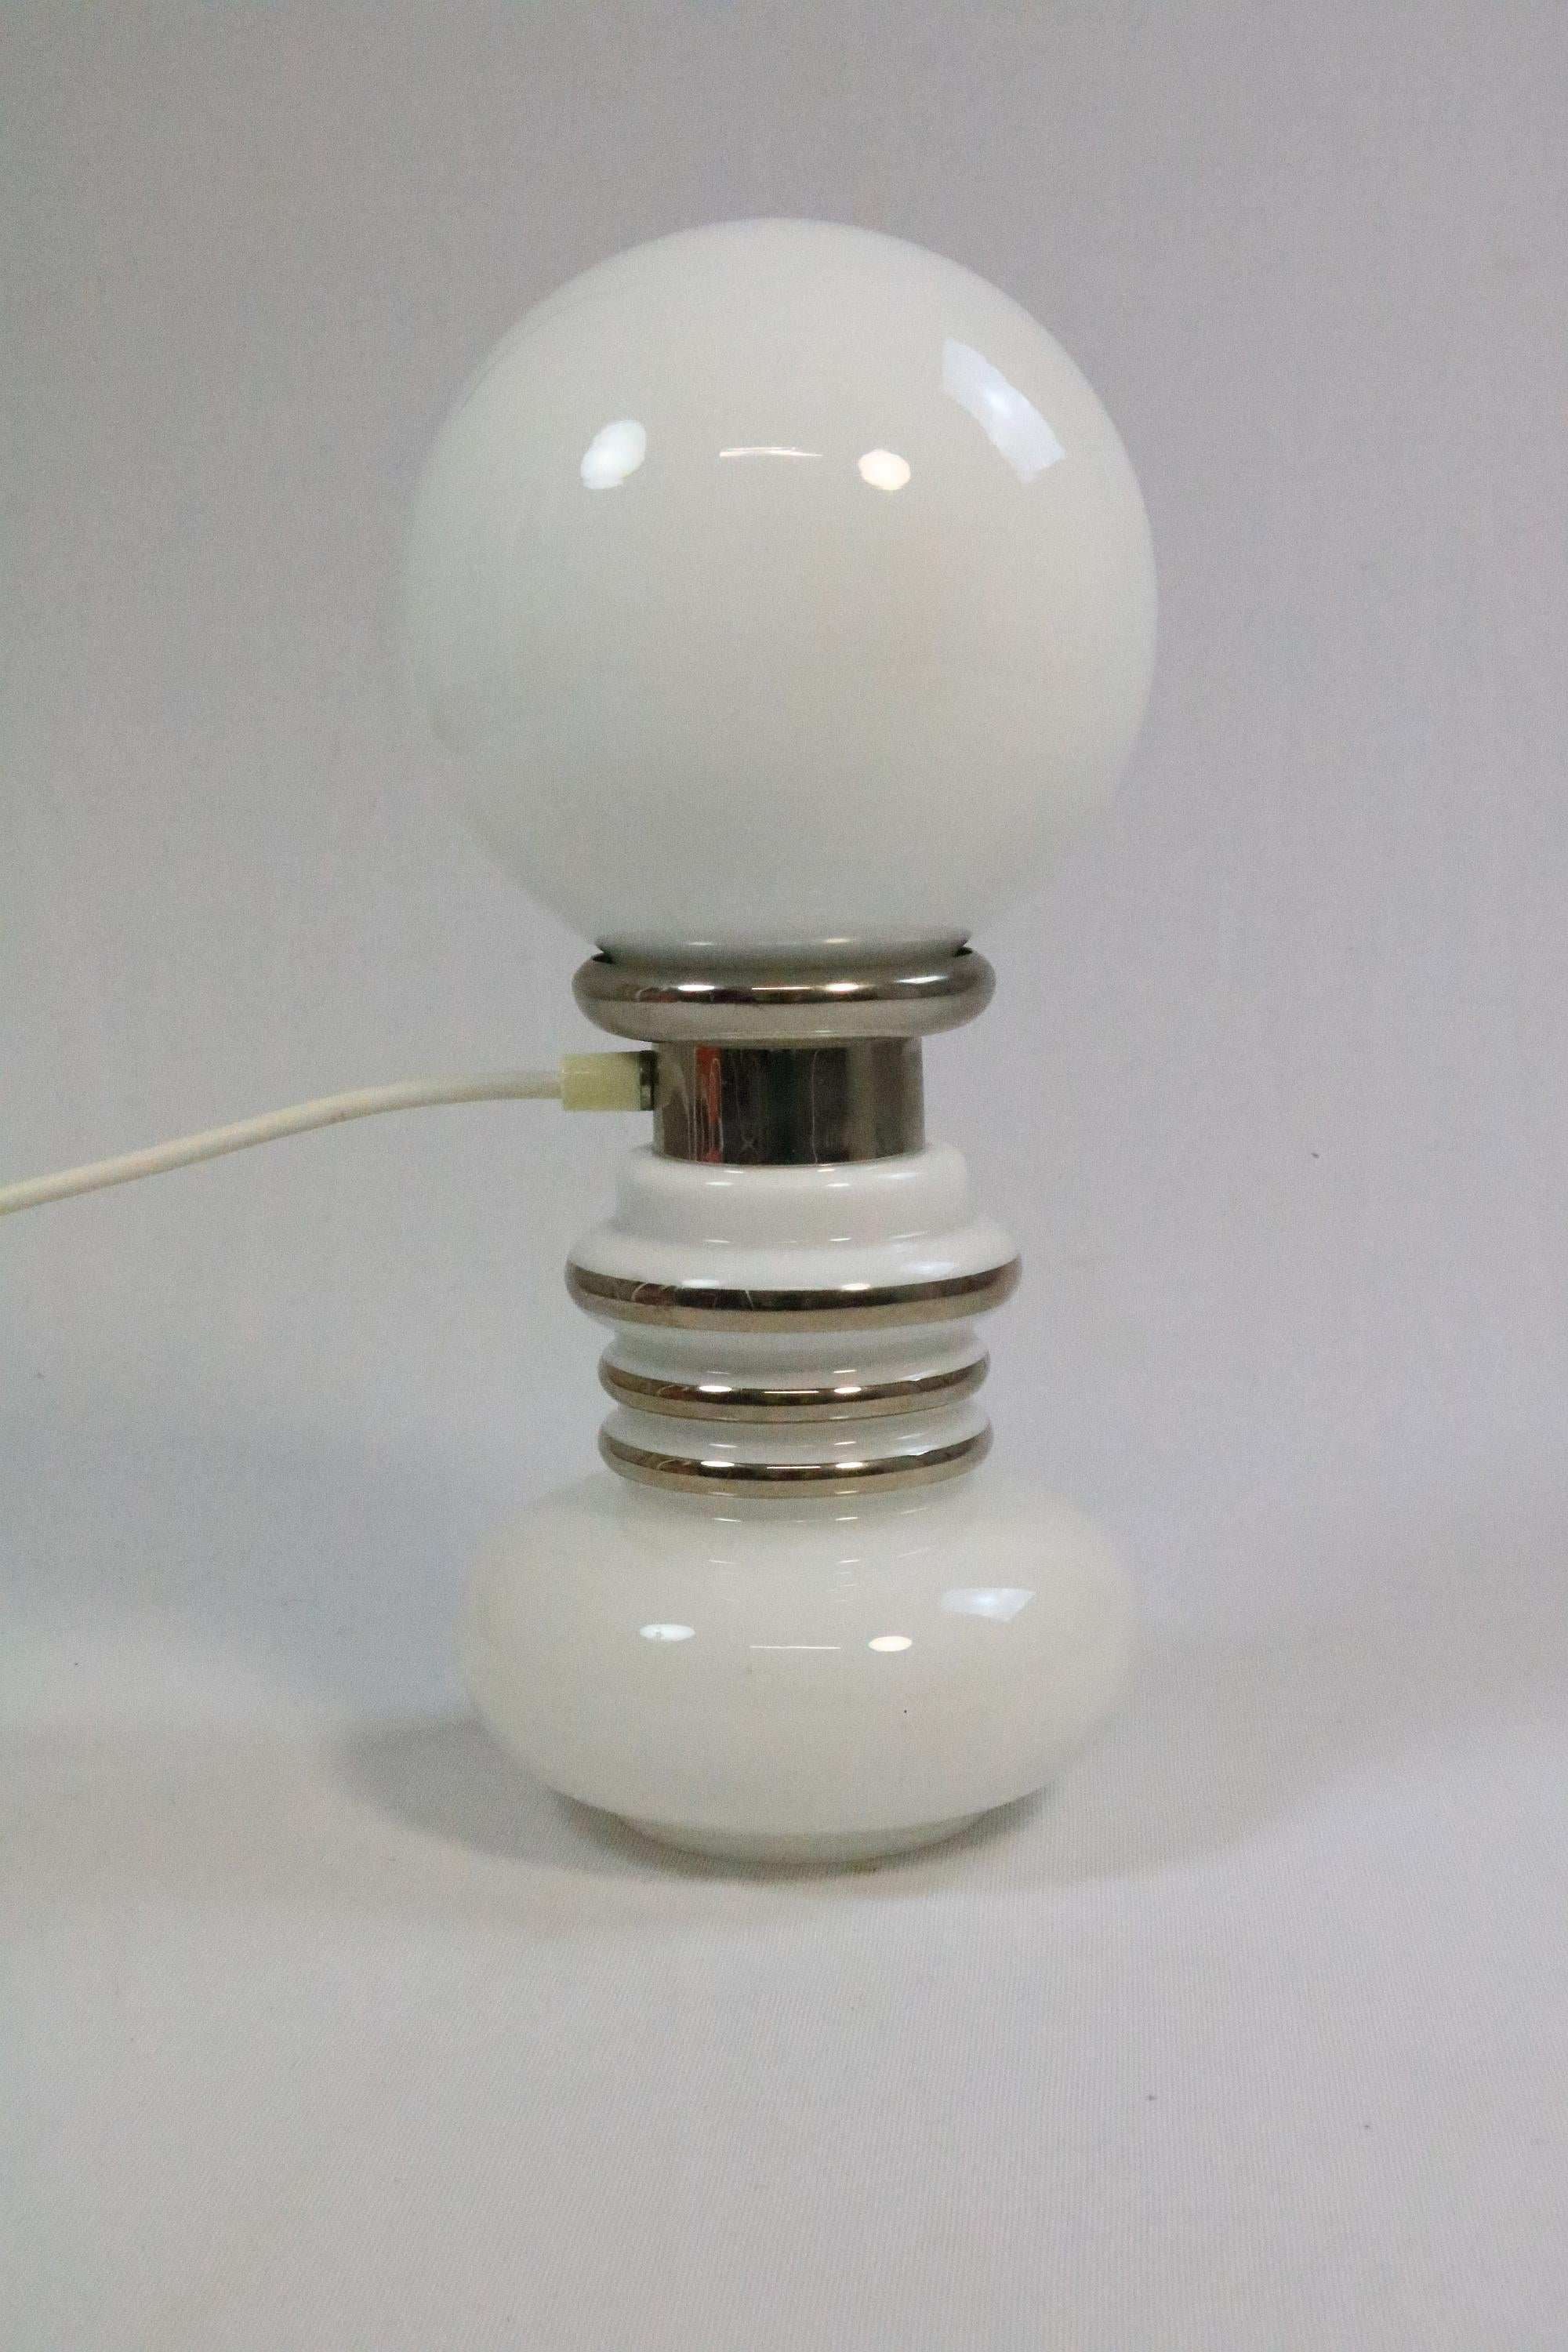 Large table lamp made of white opal glass and chrome.
In the style of the Murano table lamps by Carlo Nason.
 
Very beautiful light object, especially when turned on.
 
E14 socket, E27 socket on top. Not separately switchable.
 
Manufacturer